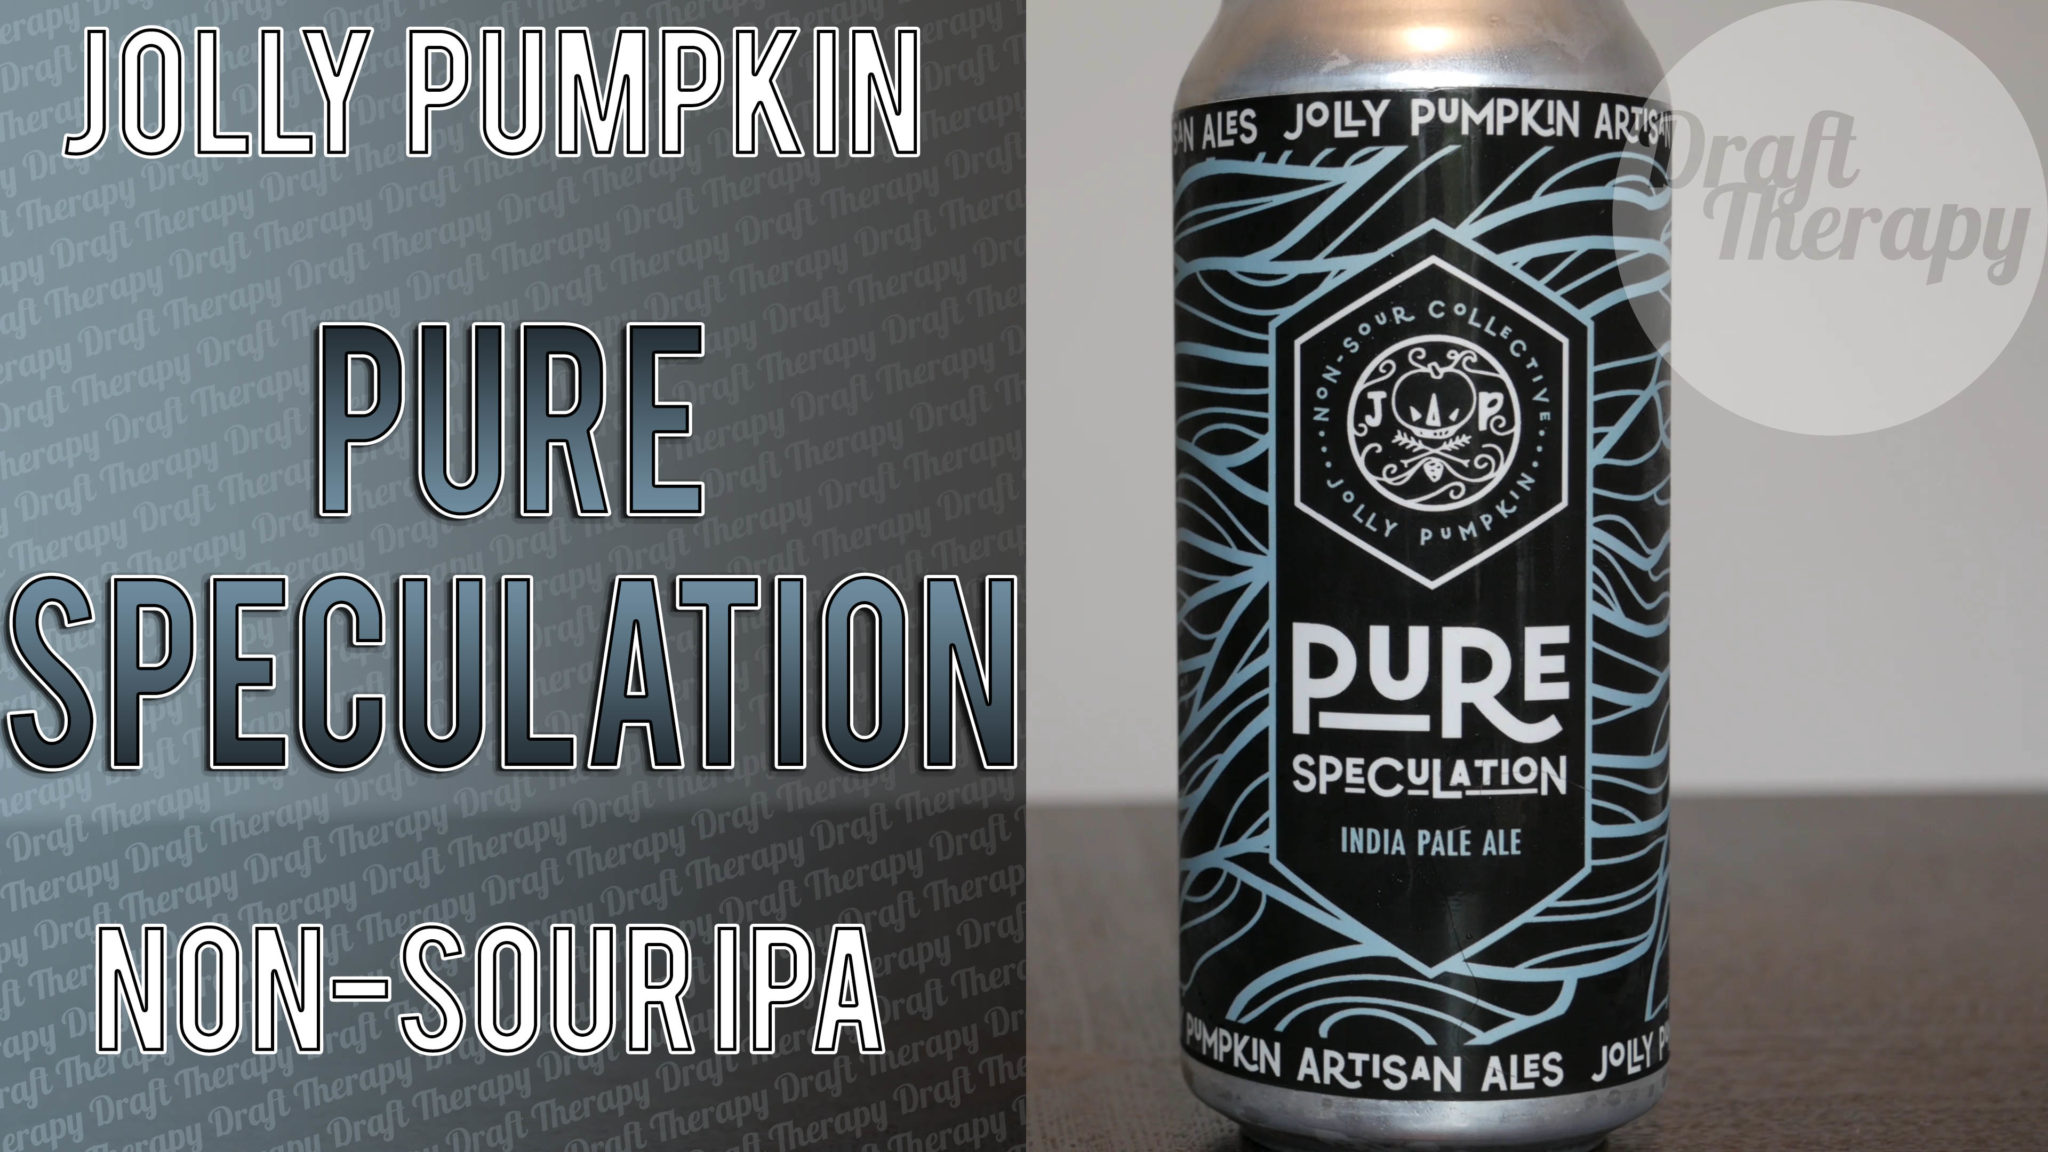 Read more about the article Jolly Pumpkin – Pure Speculation